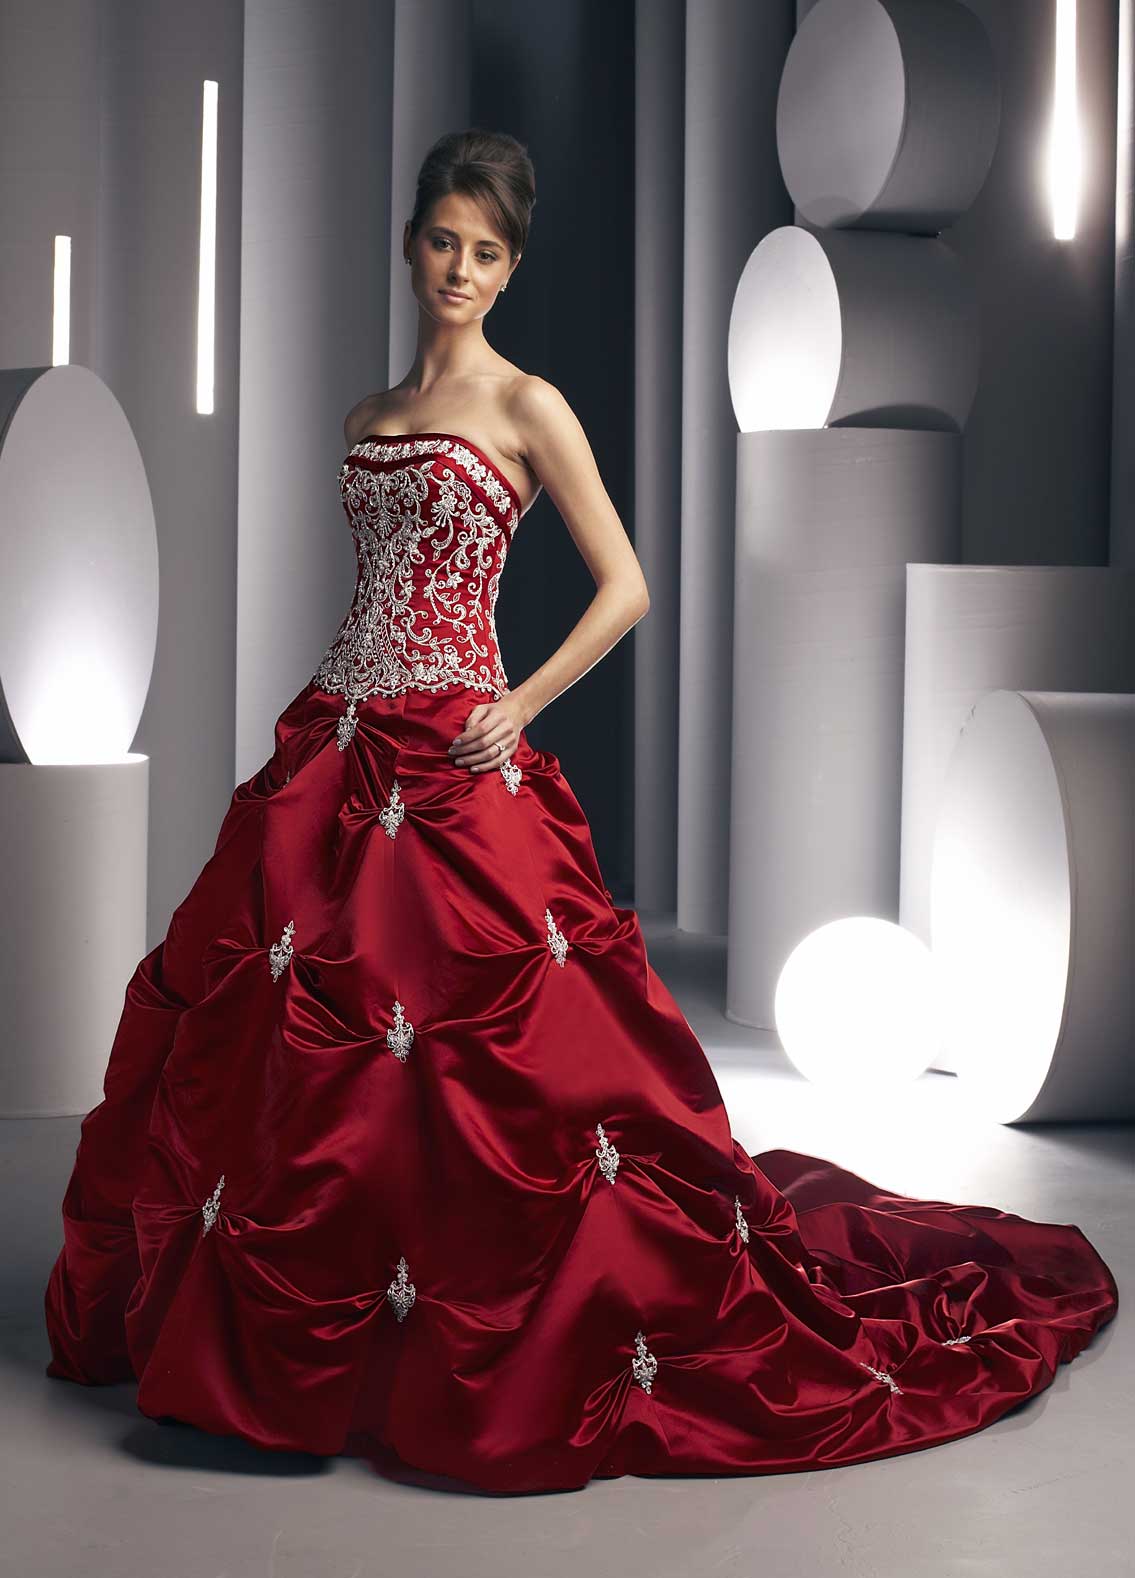 All About Fashion, Mode and Beauty: Red Color Wedding Gown